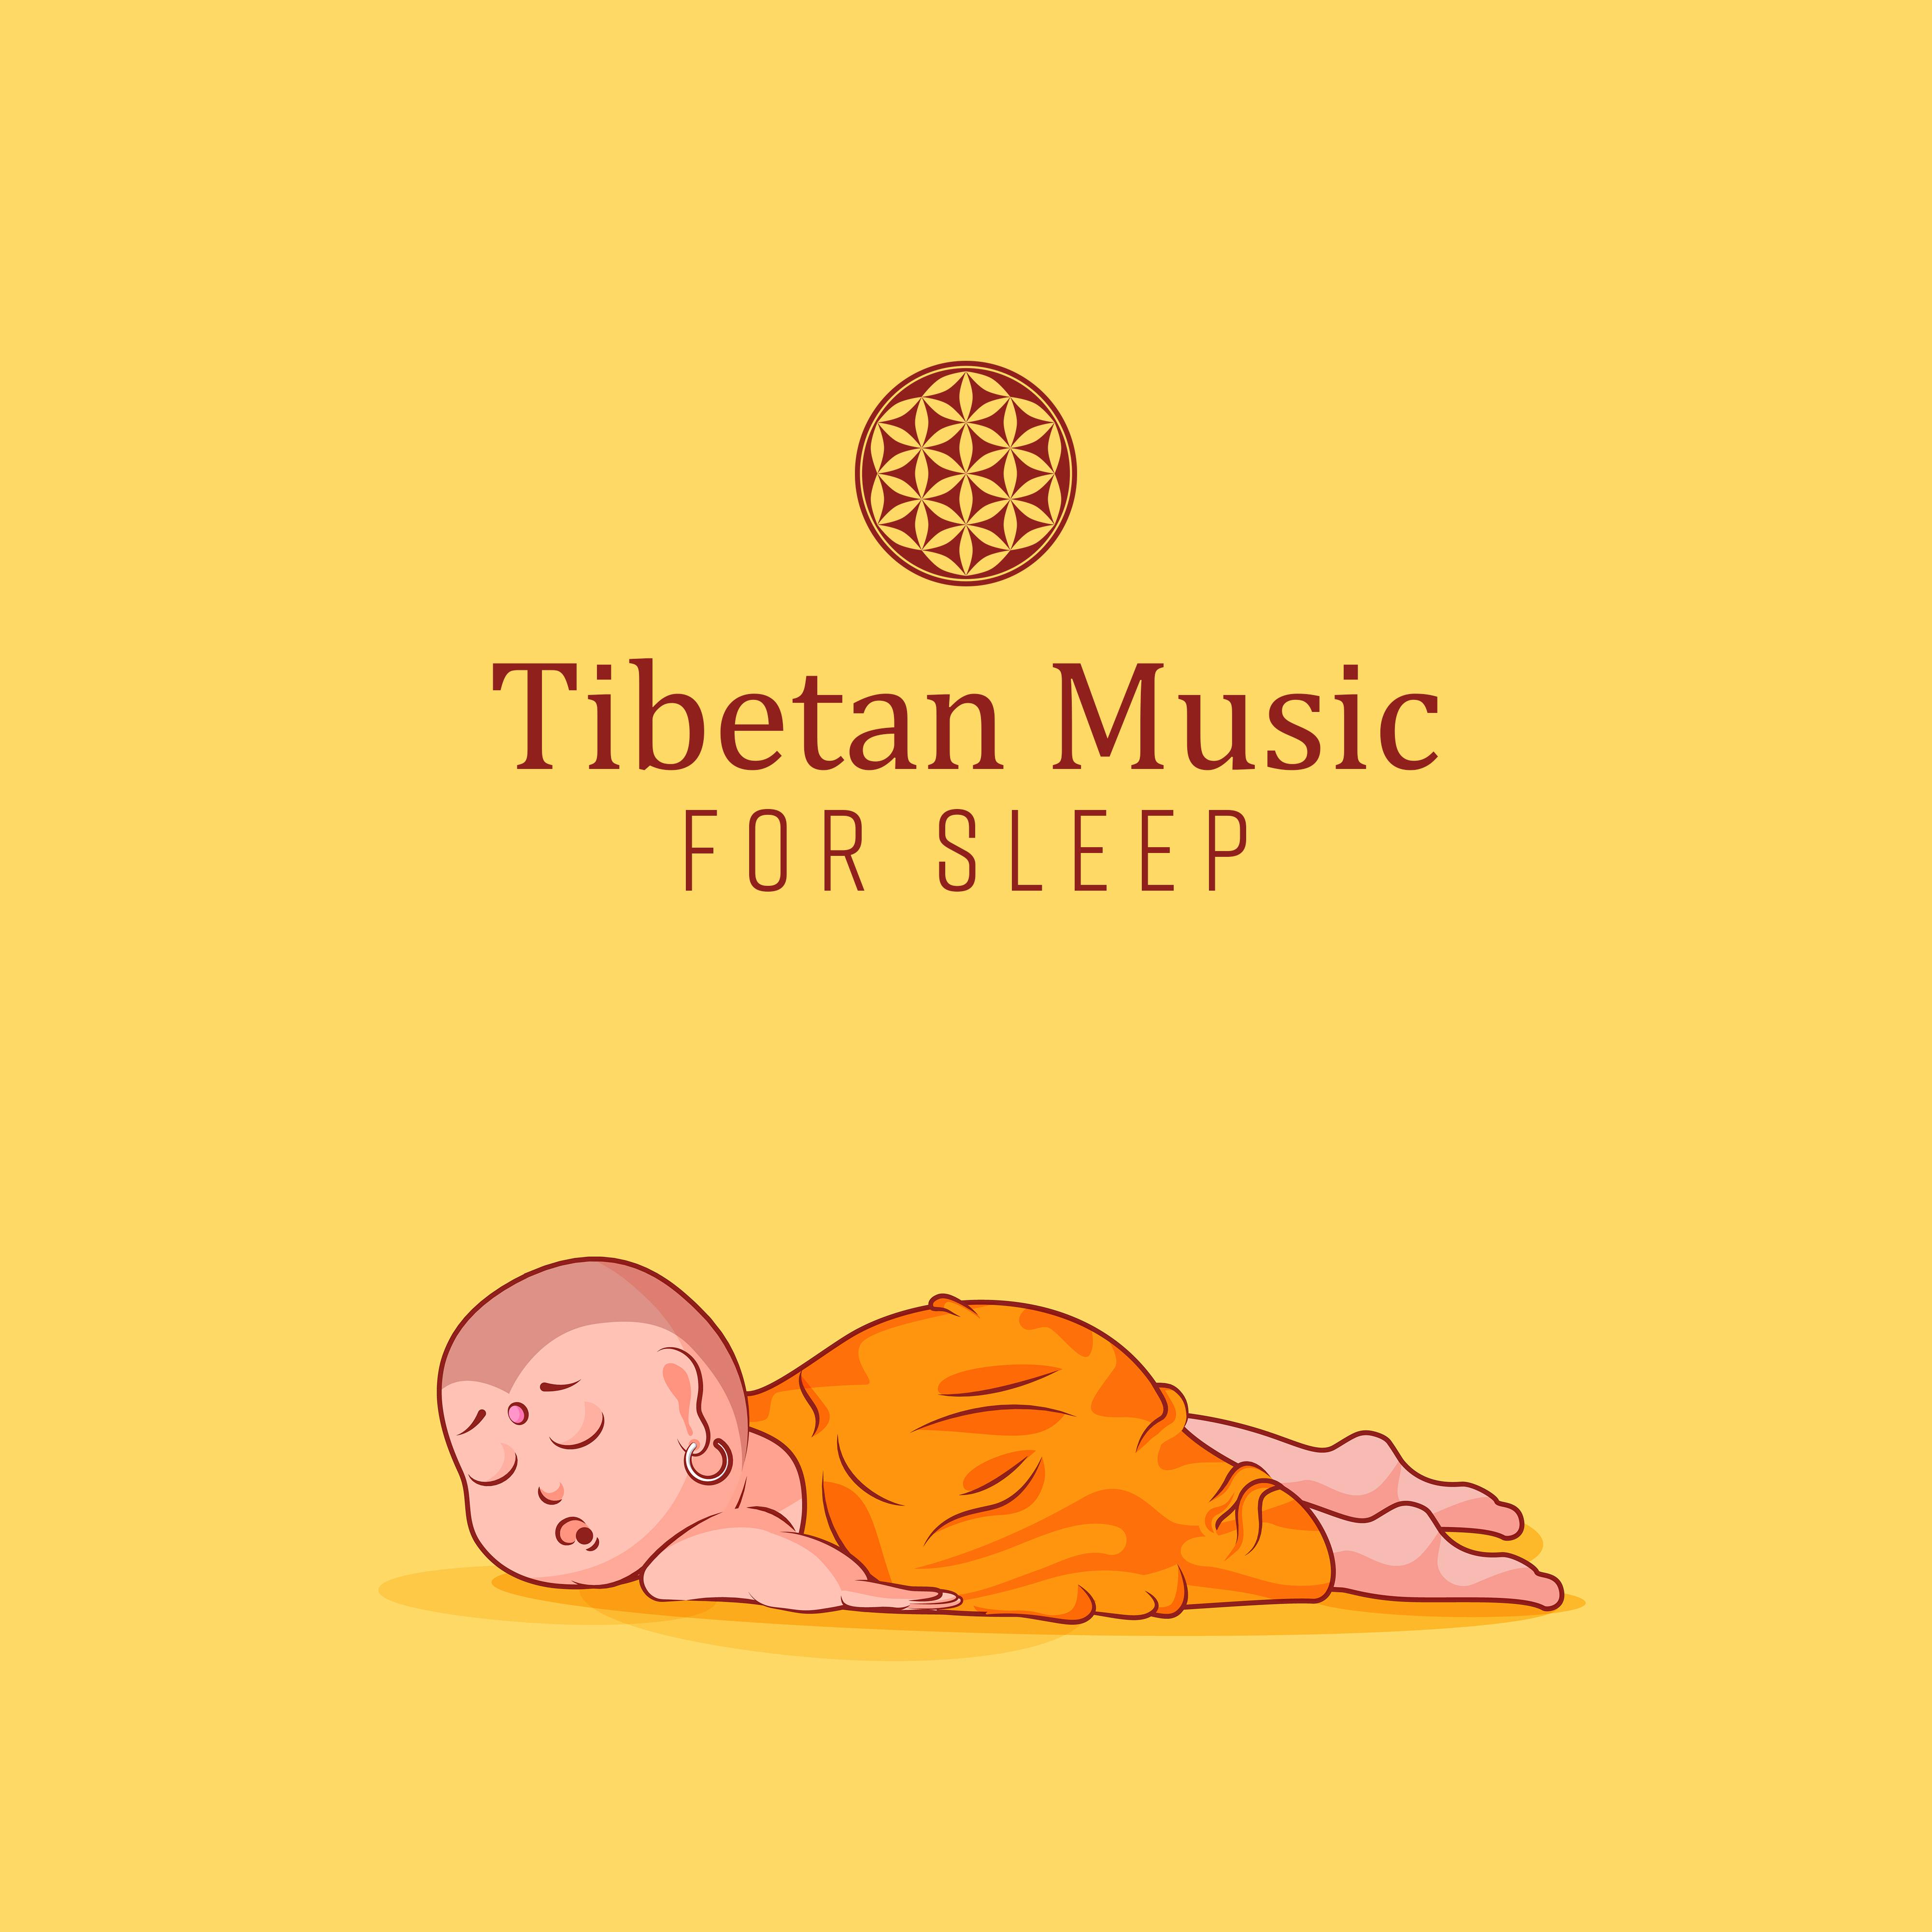 Tibetan Music for Sleep: Unique New Age Music Inspired by Tibetan Culture